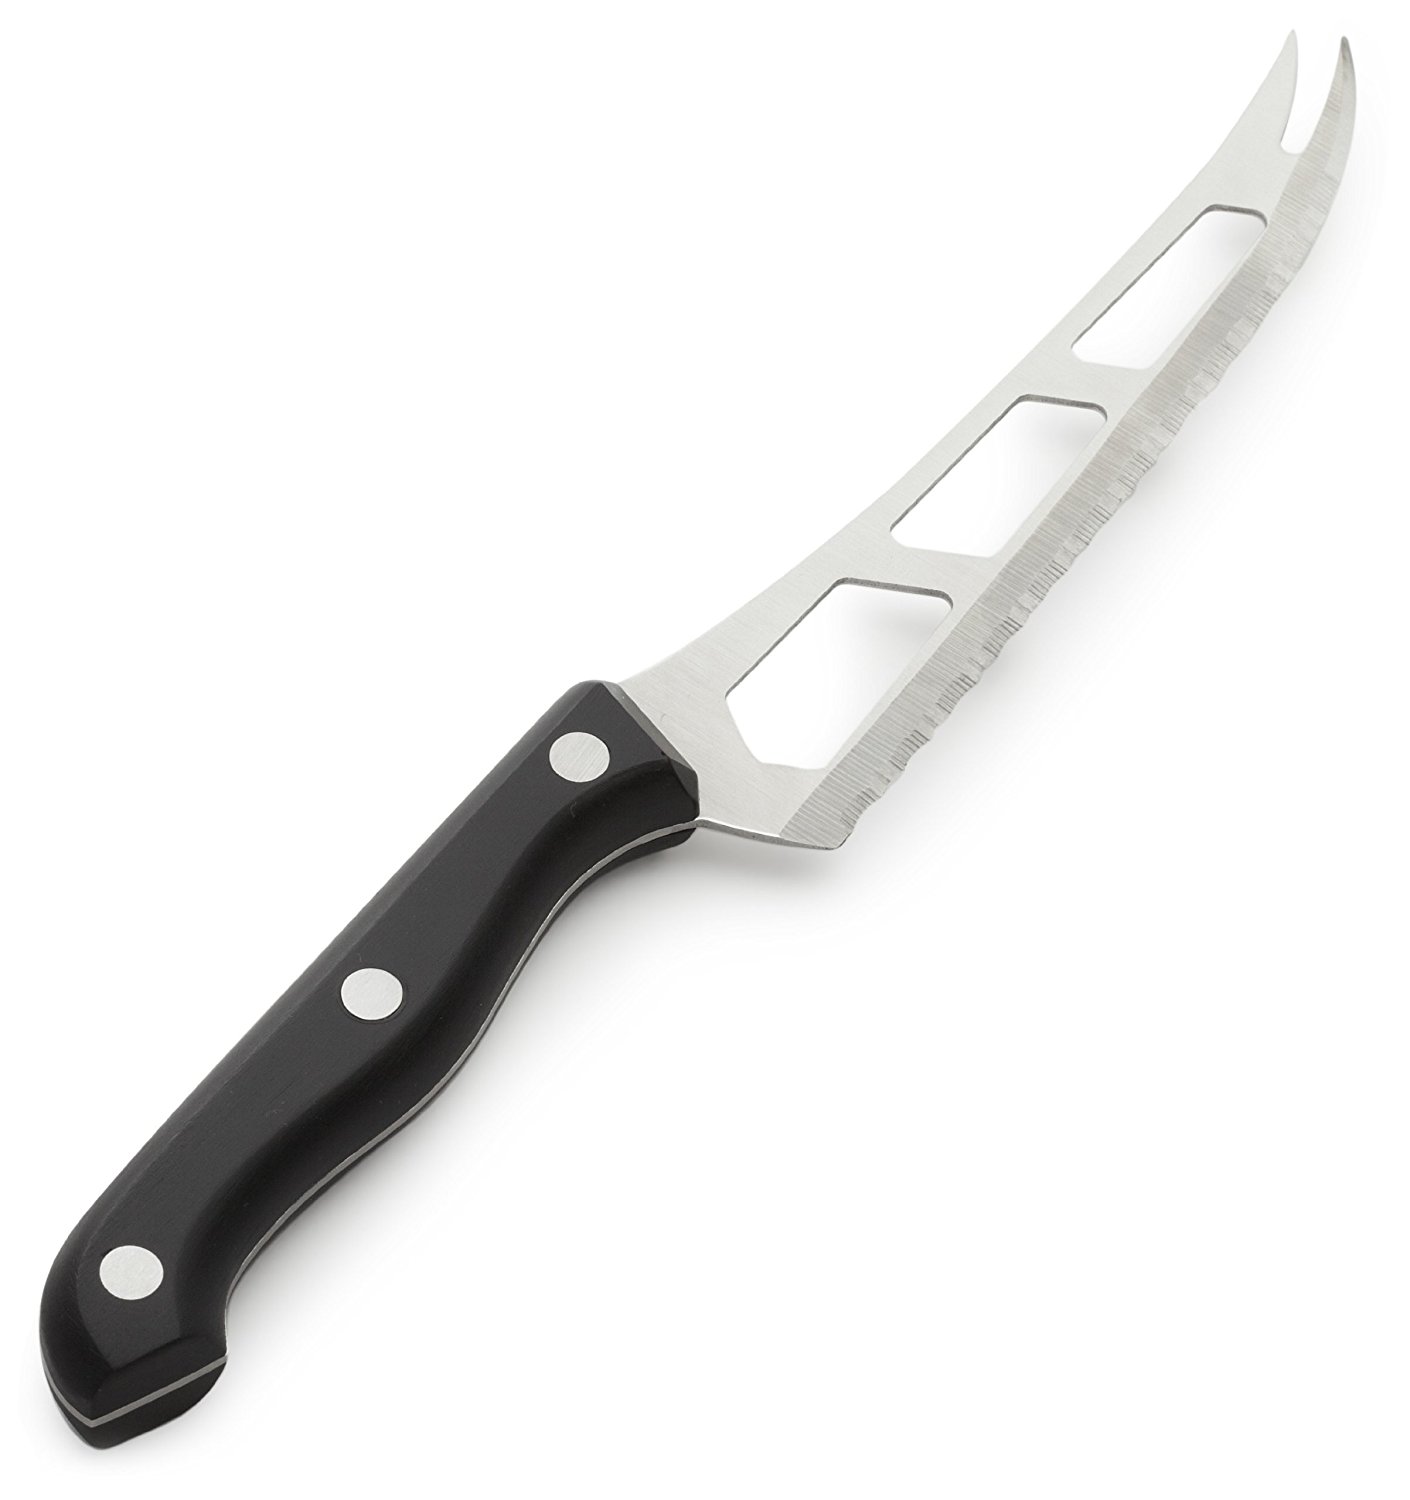 Amazon.com: Cheese Knives: Home & Kitchen